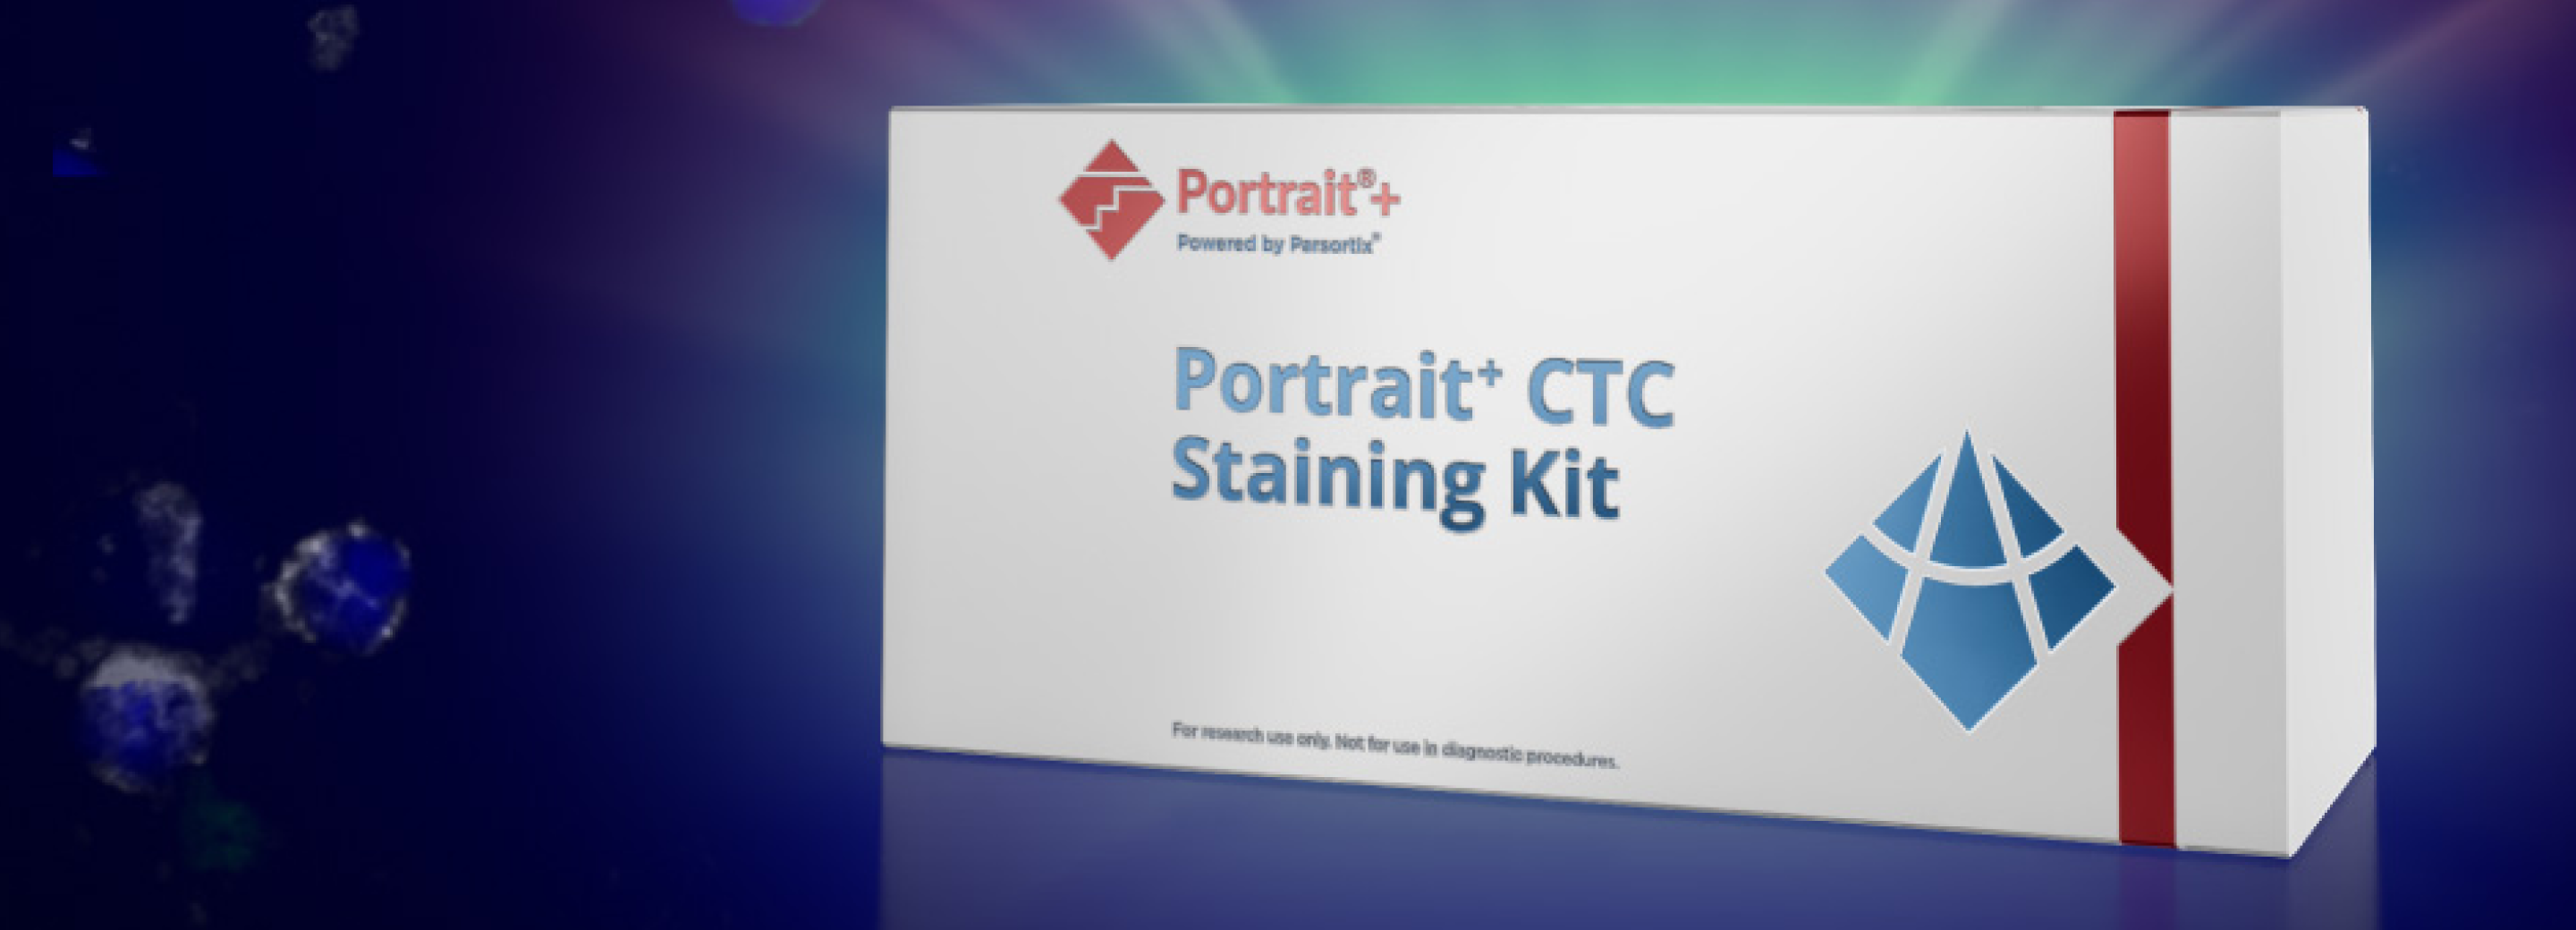 Portrait+ CTC Staining Kit by ANGLE PLC